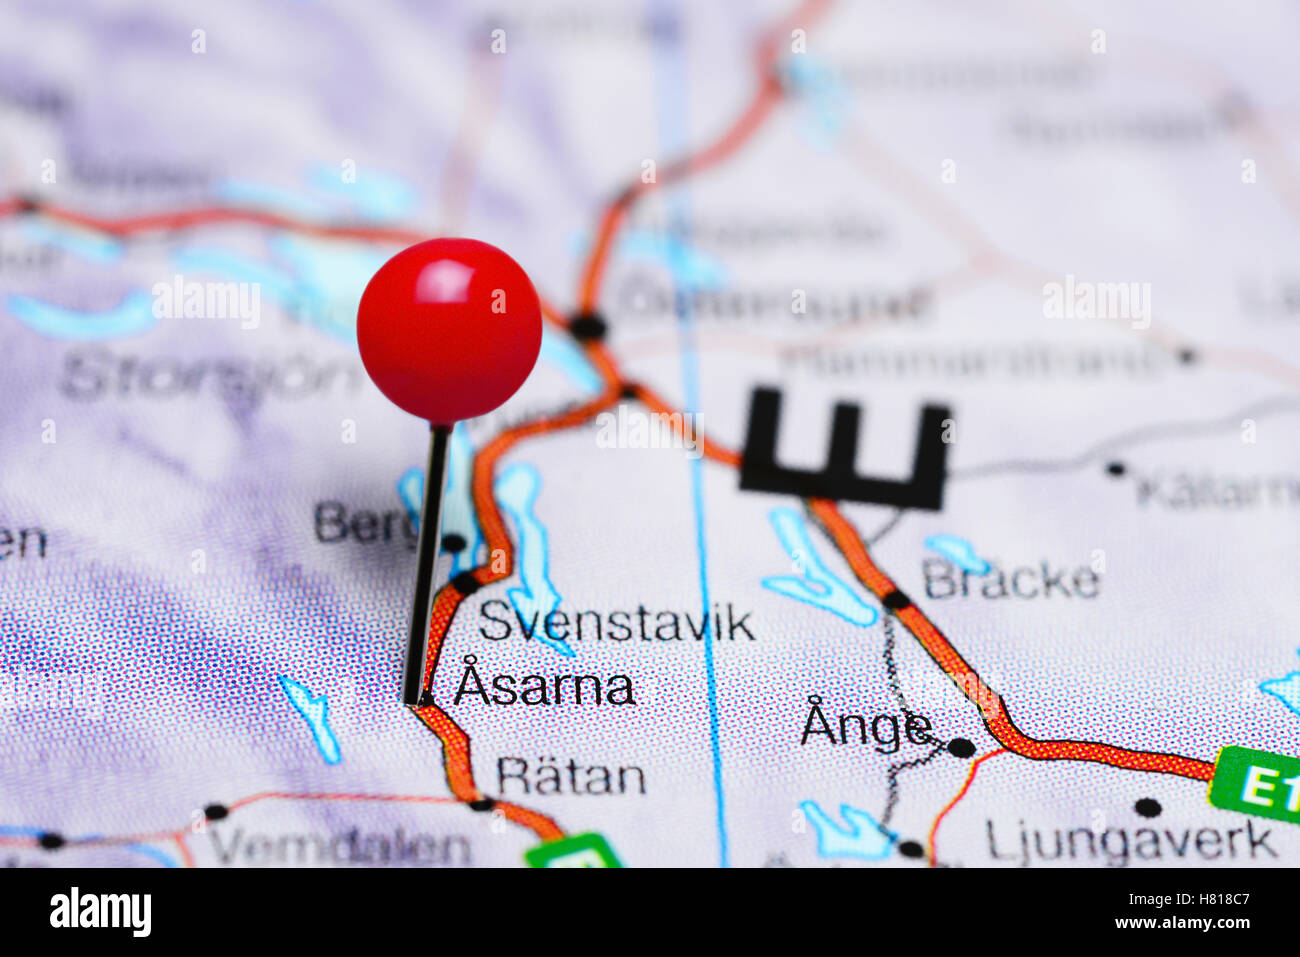 Asarna pinned on a map of Sweden Stock Photo